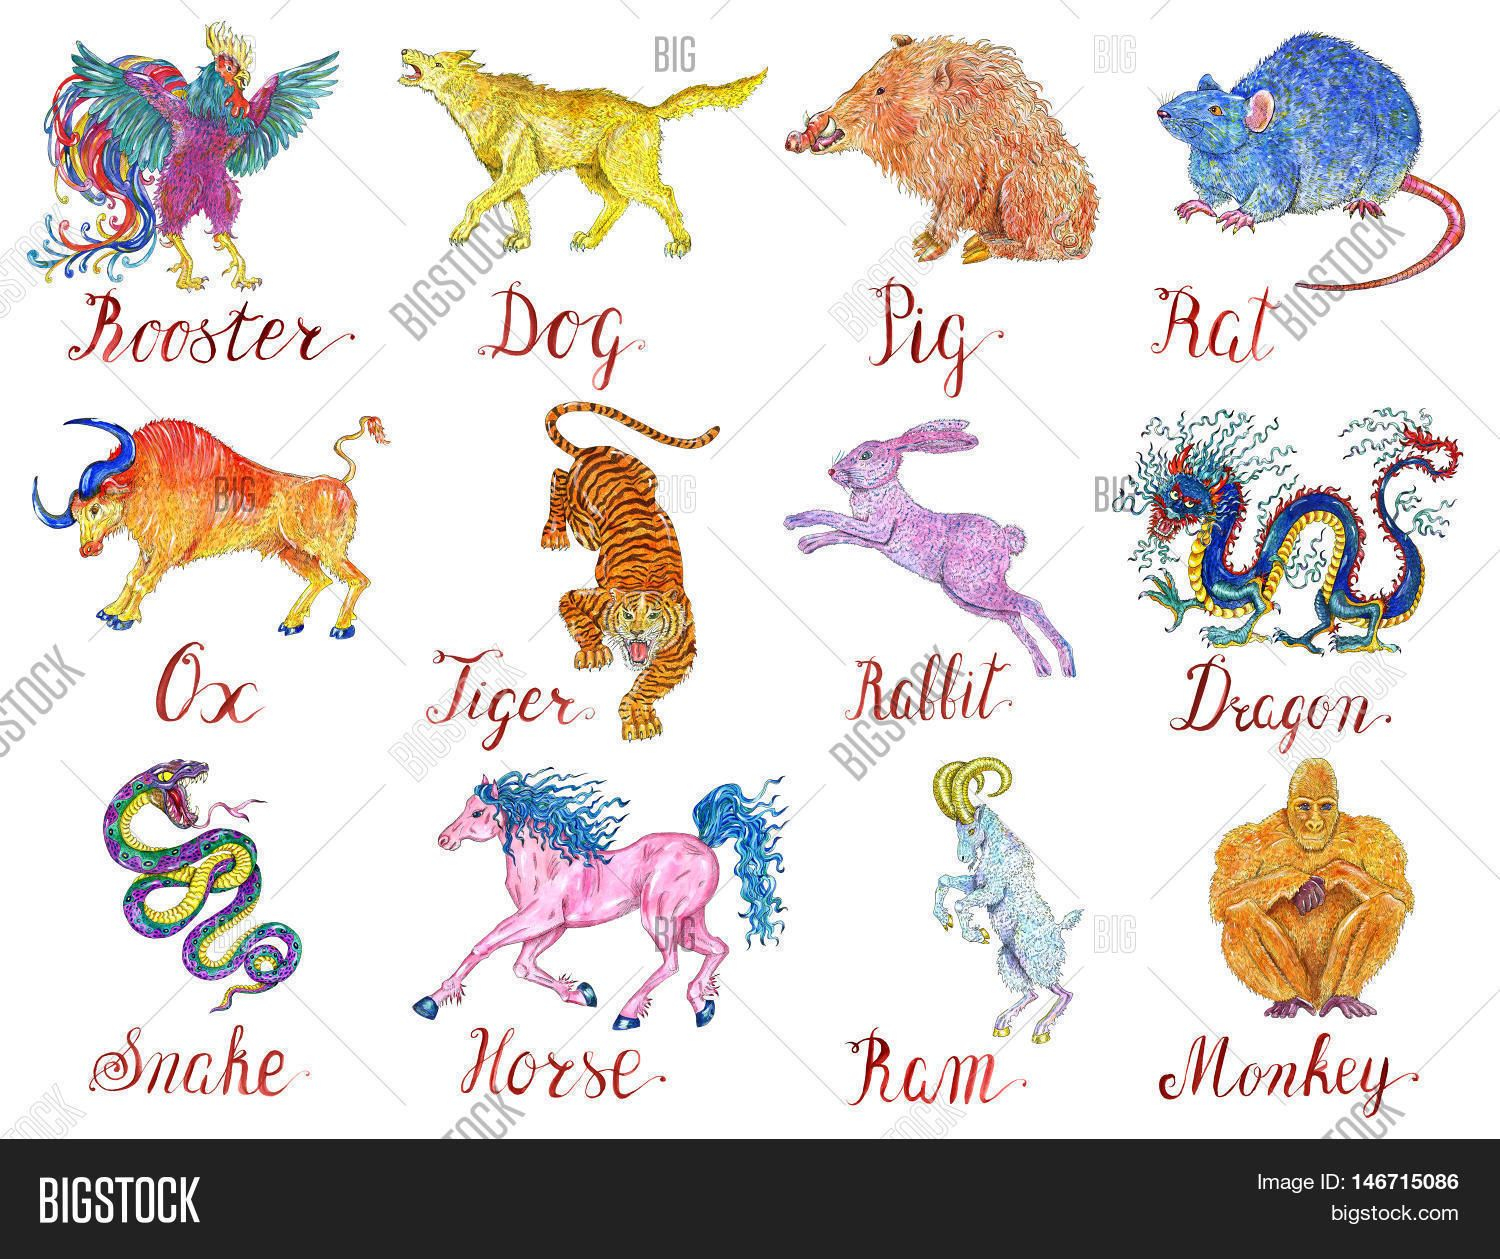 Templates For The Chinese Zodiac Animals | Calendar